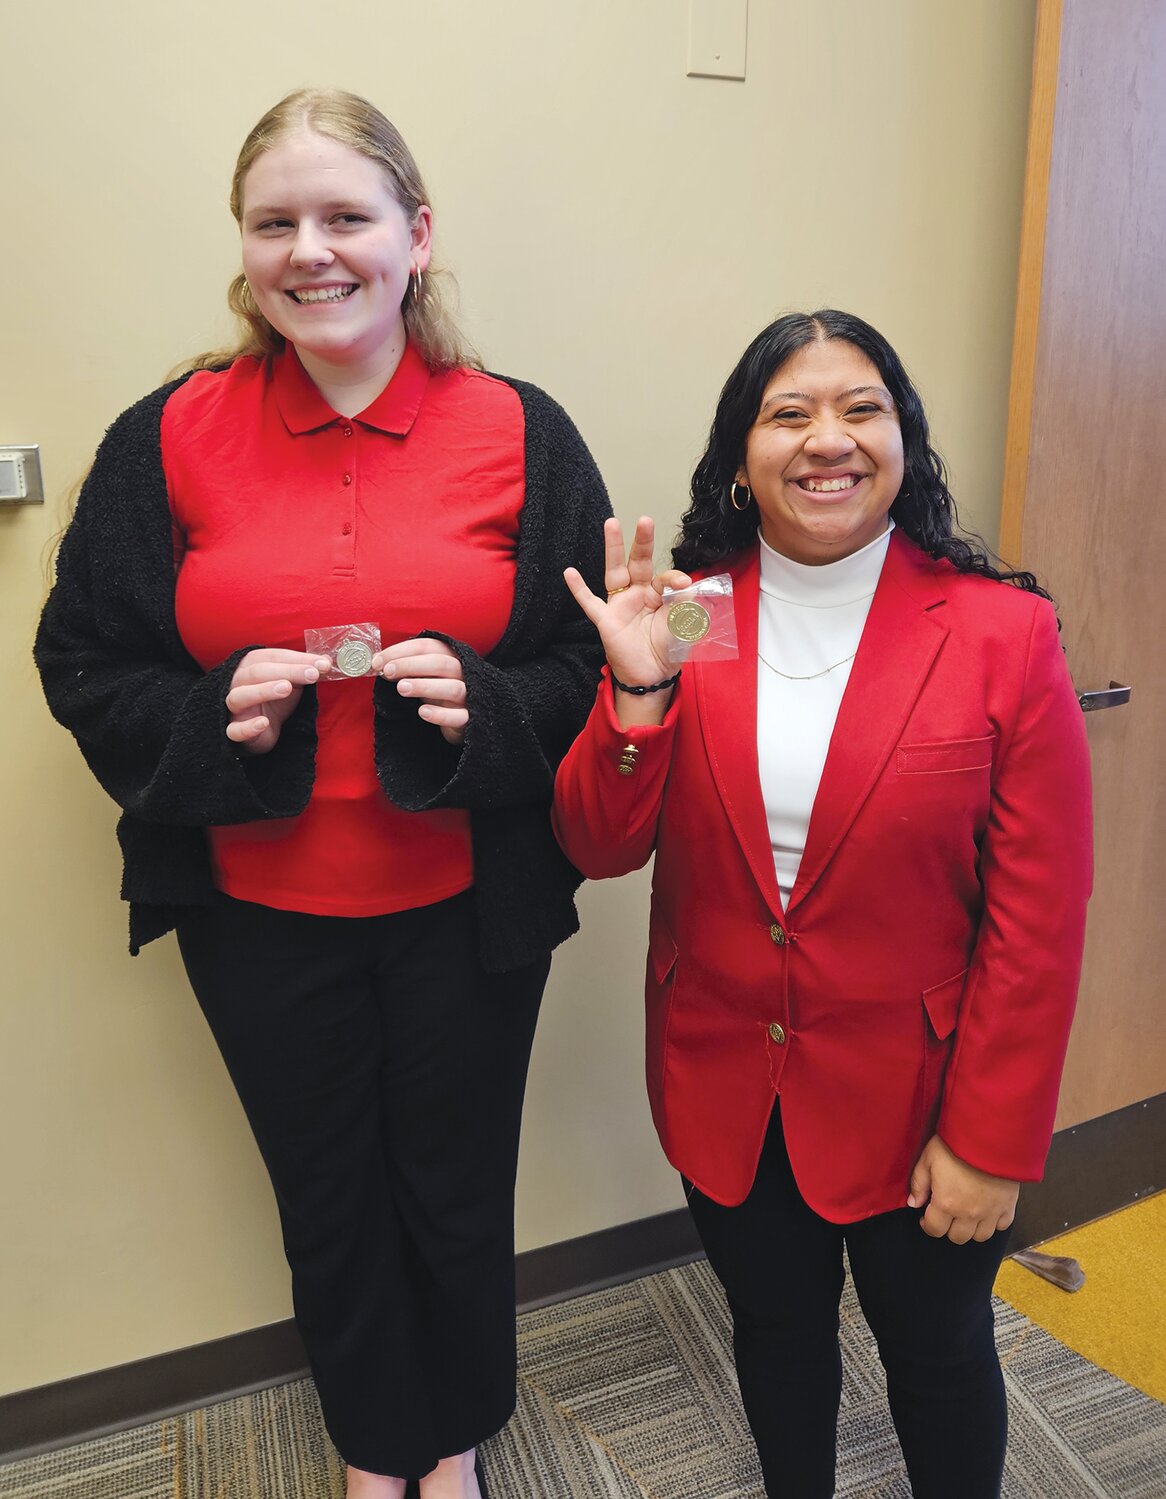 Joselyn Saltzman (left) and Alondra Vega will represent Wayne High School at the State FCCLA STAR competition this spring.